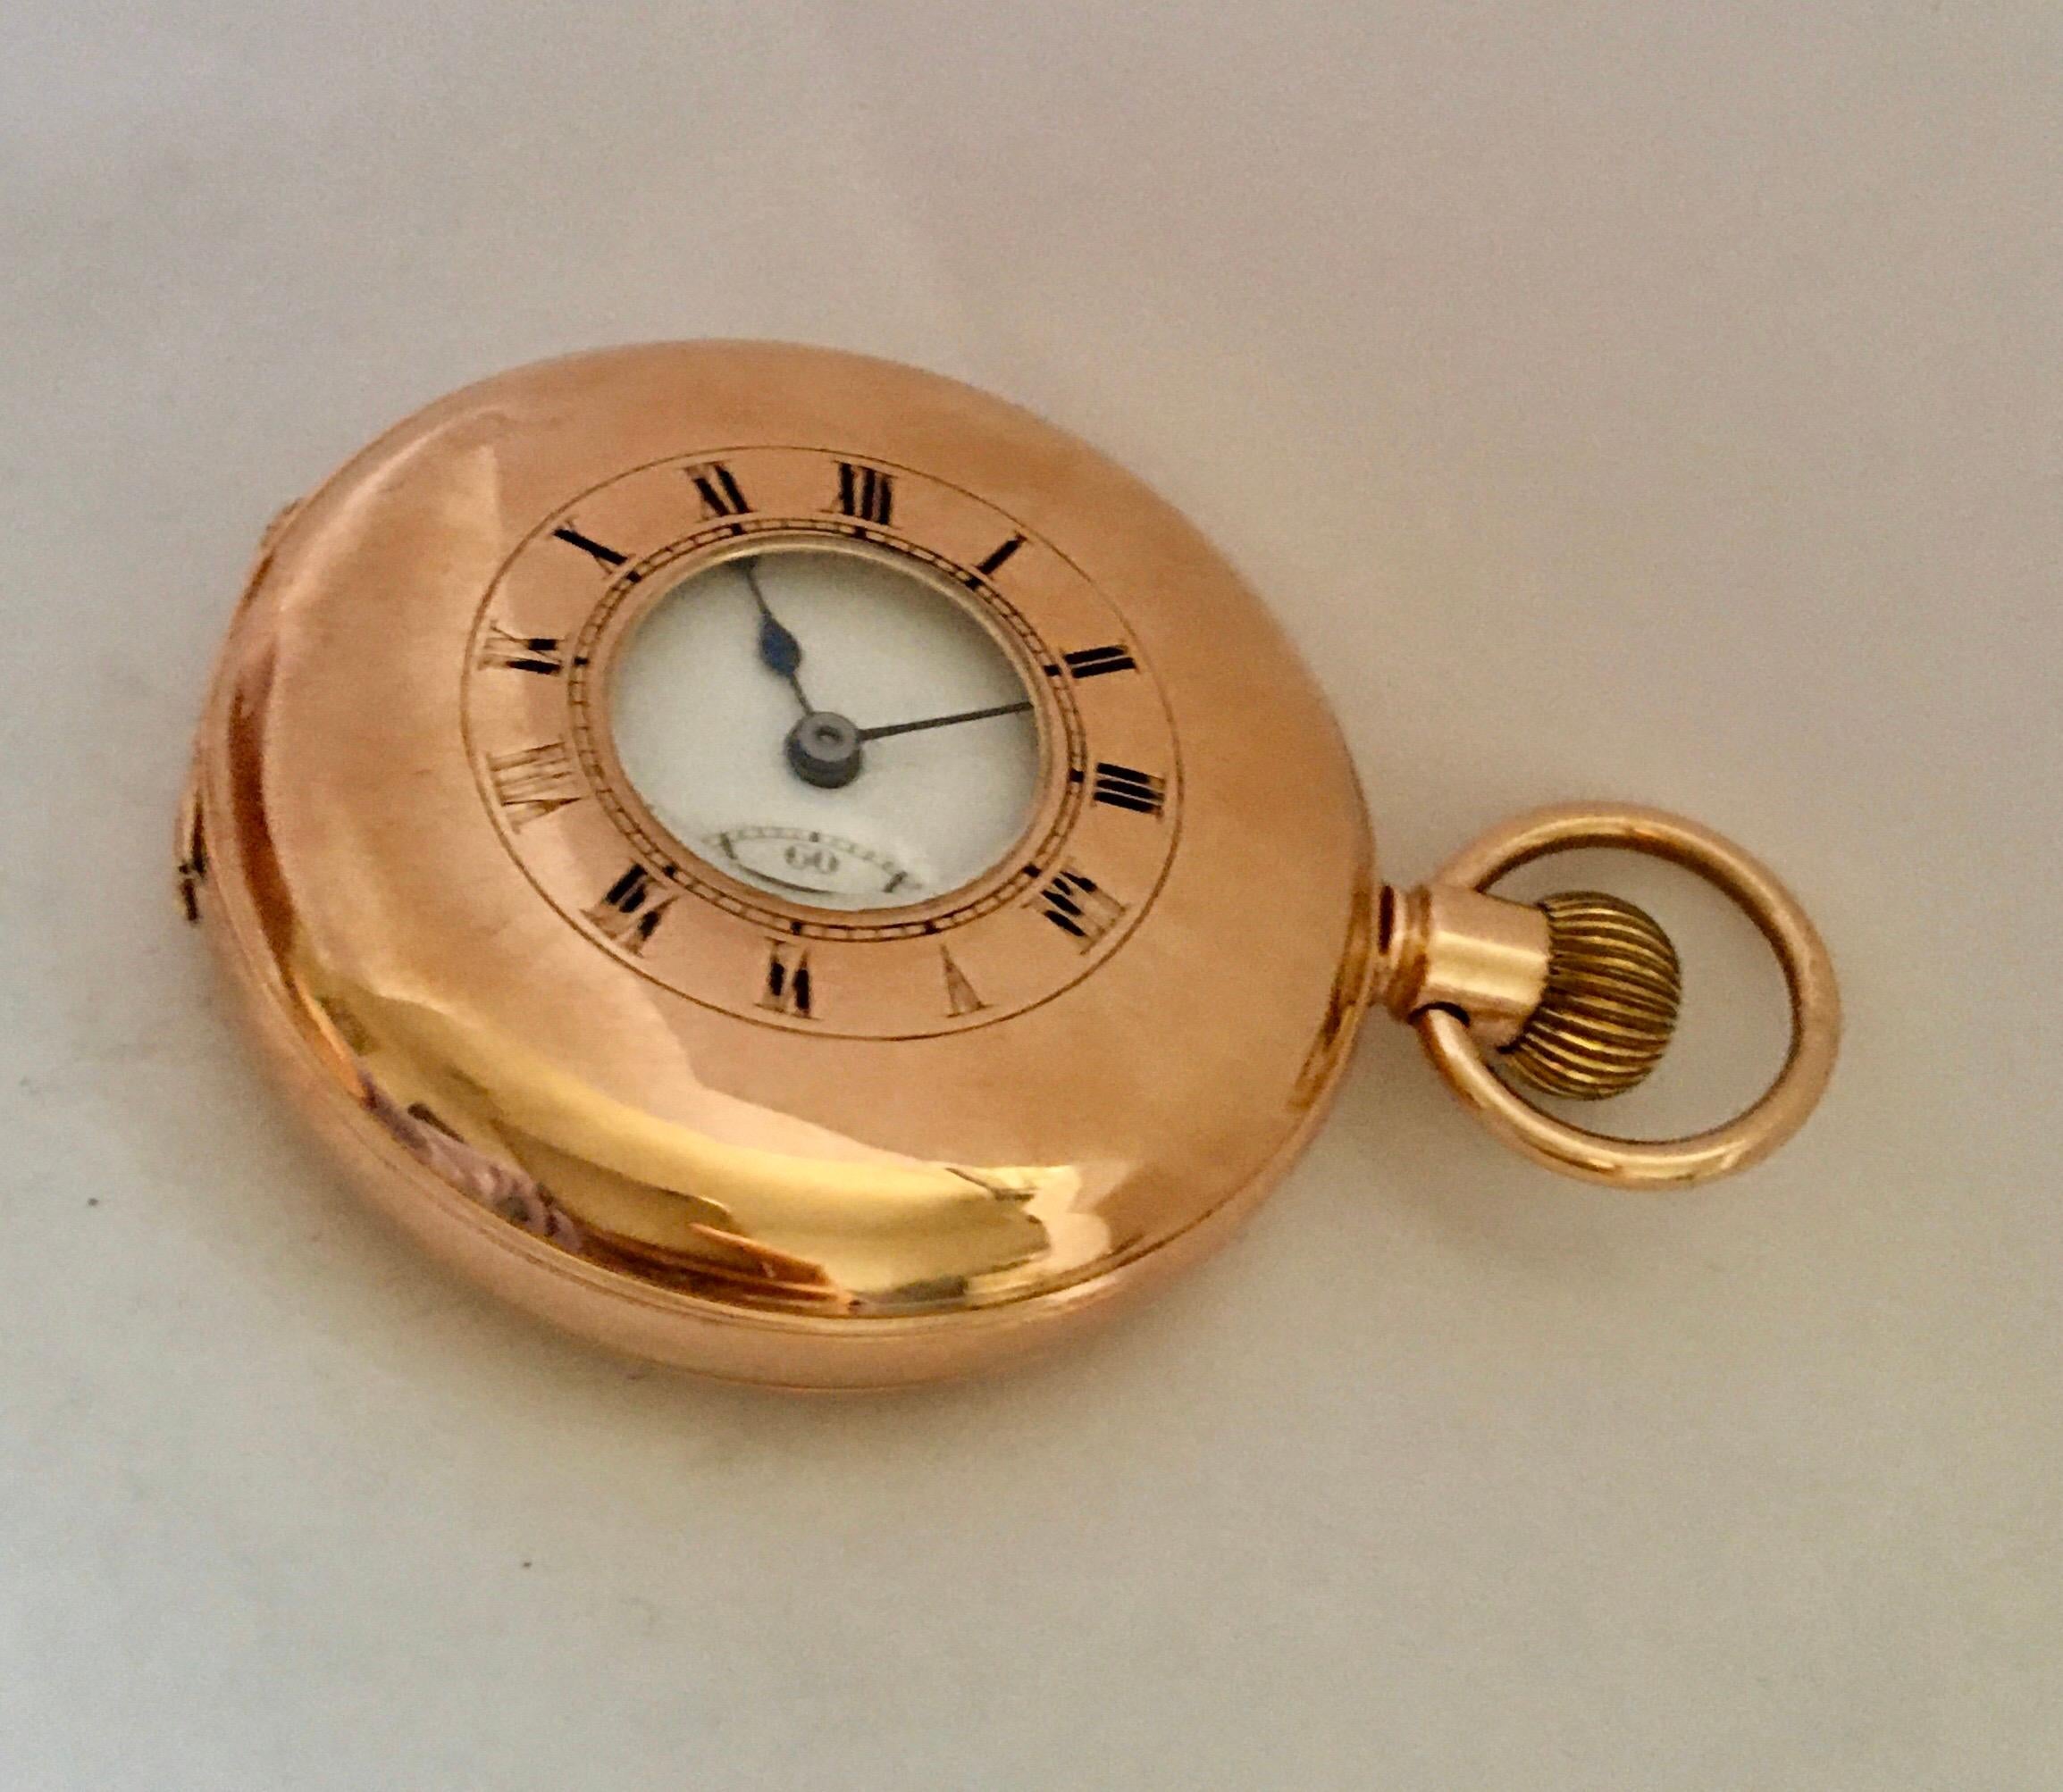 This beautiful pre-own half hunter gold pocket watch is in good working condition and it is running well. Visible signs of ageing and wear with light and tiny scratches and dents on the gold watch case and some Roman numerals on the top cover has